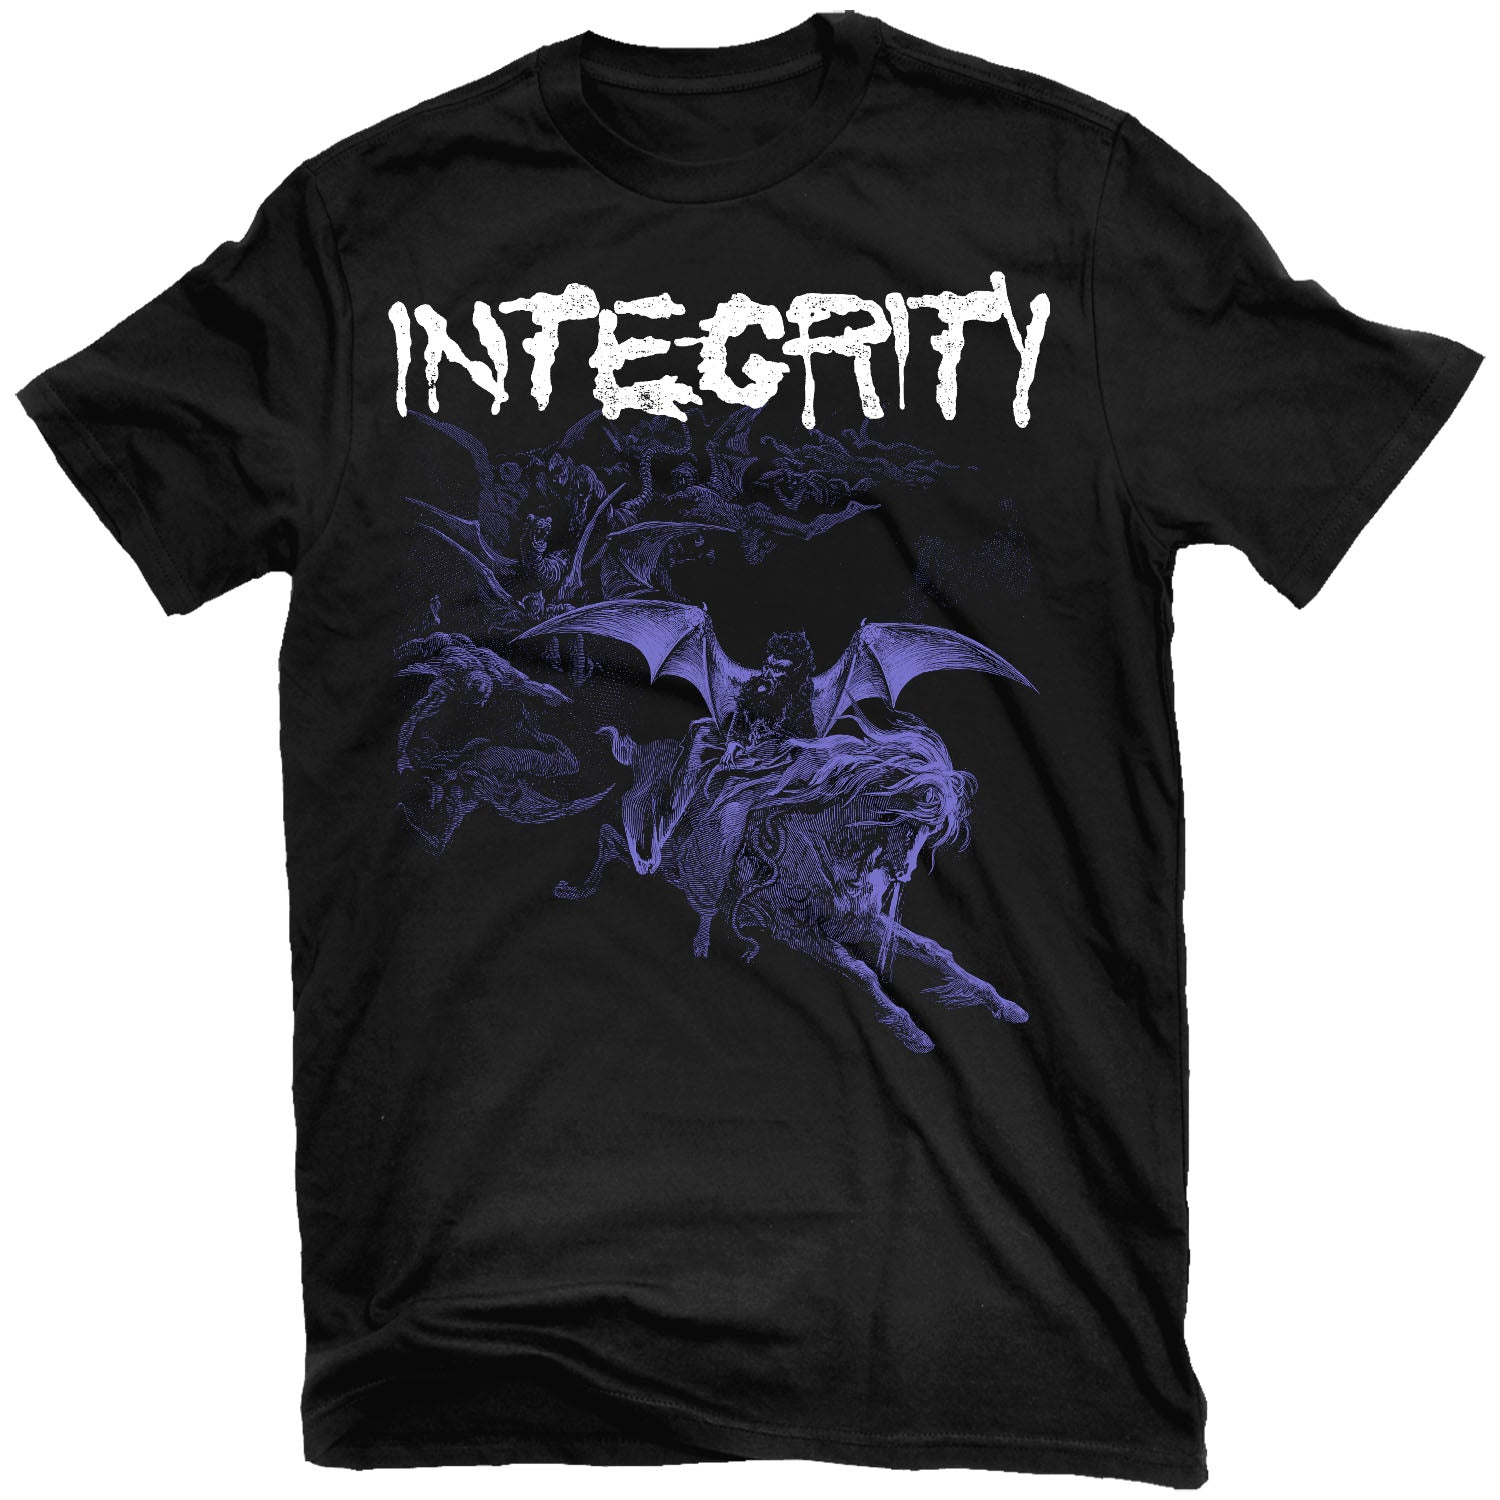 Integrity "Scorched Earth" T-Shirt